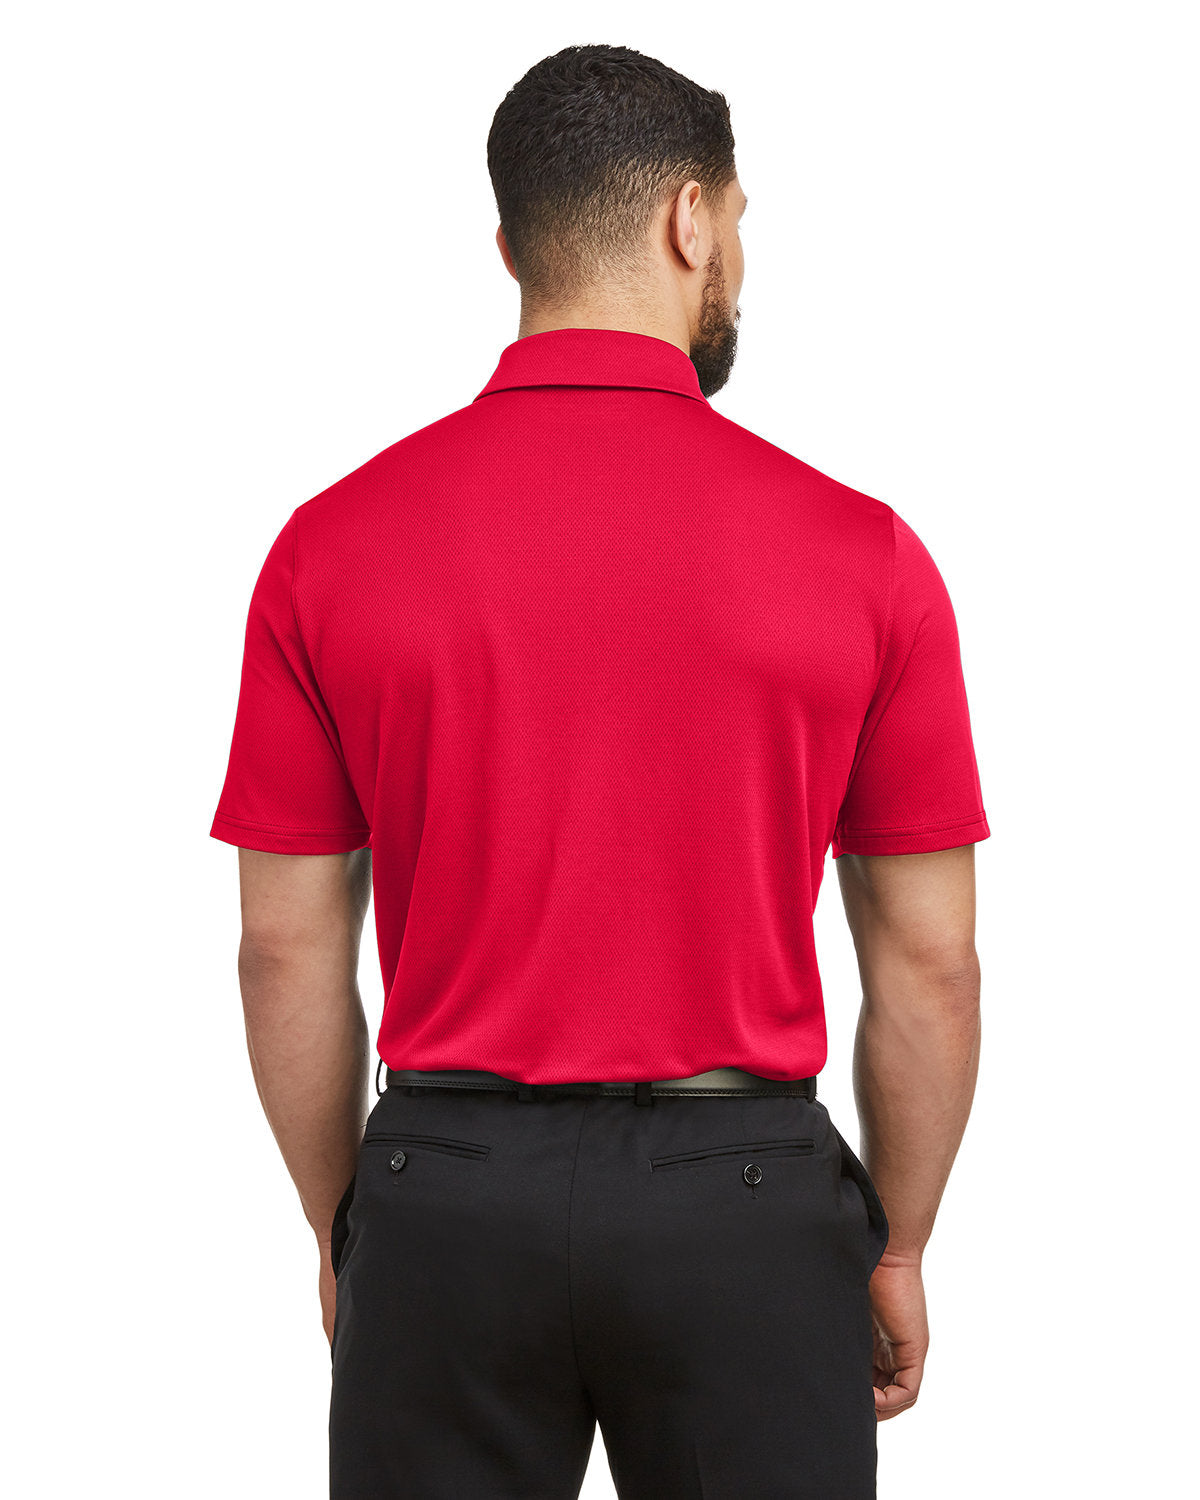 Under Armour Men's Tech Customized Polos, Red